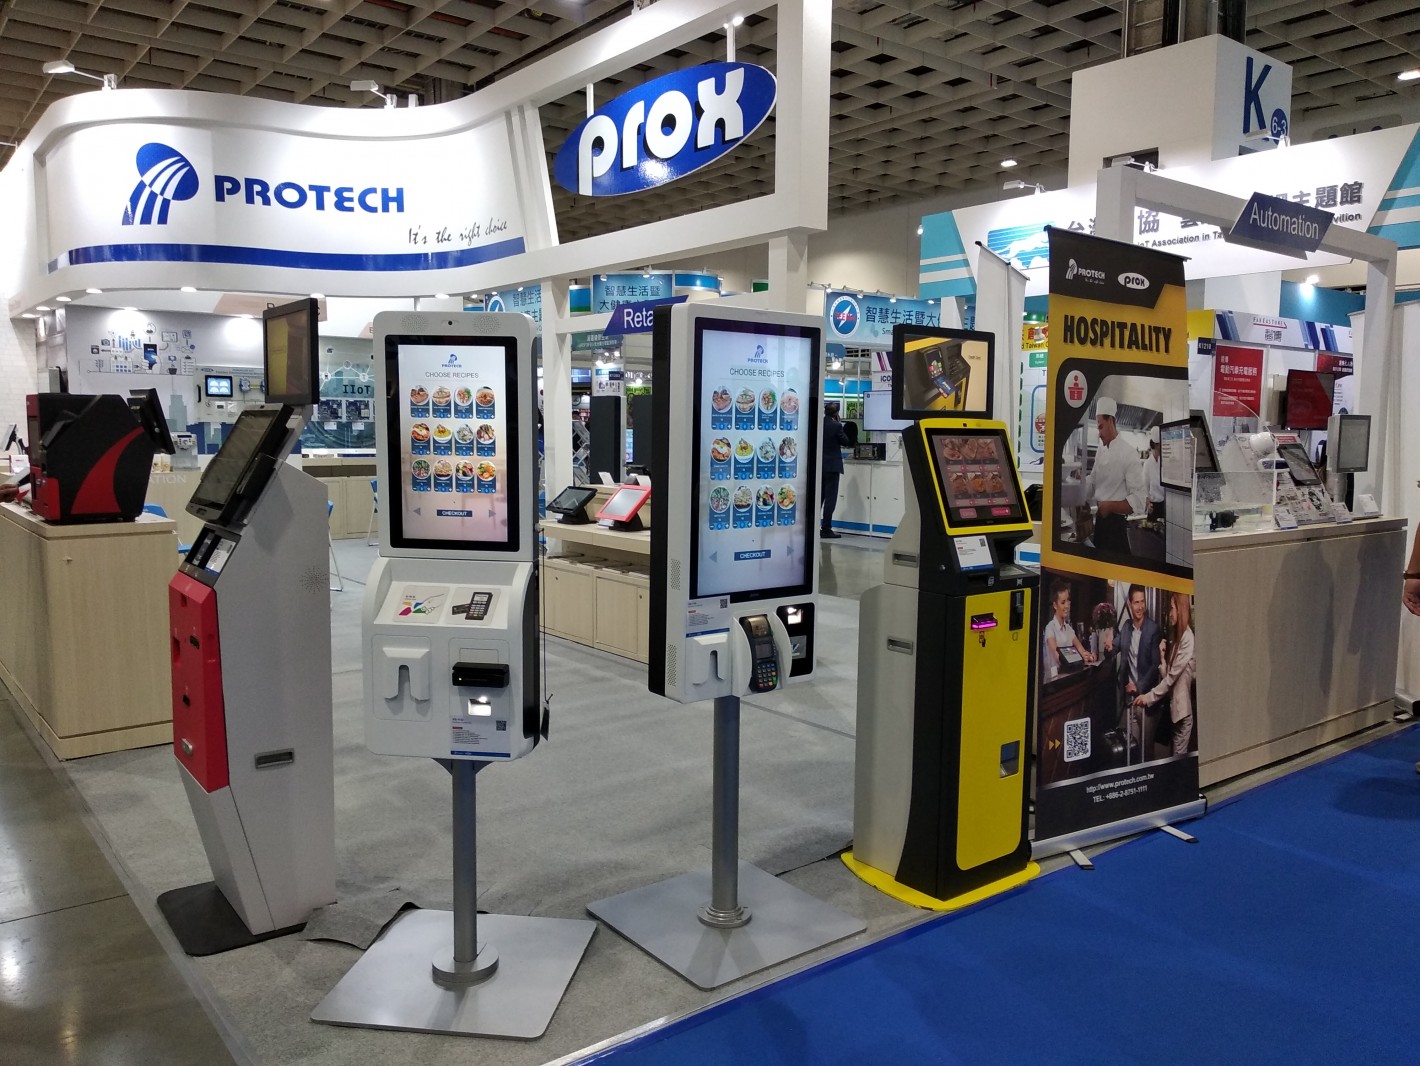 Protech Systems Co., Ltd. continues to participate in domestic and foreign exhibitions and continues to enhance the reputation and competitiveness of the MIT label.